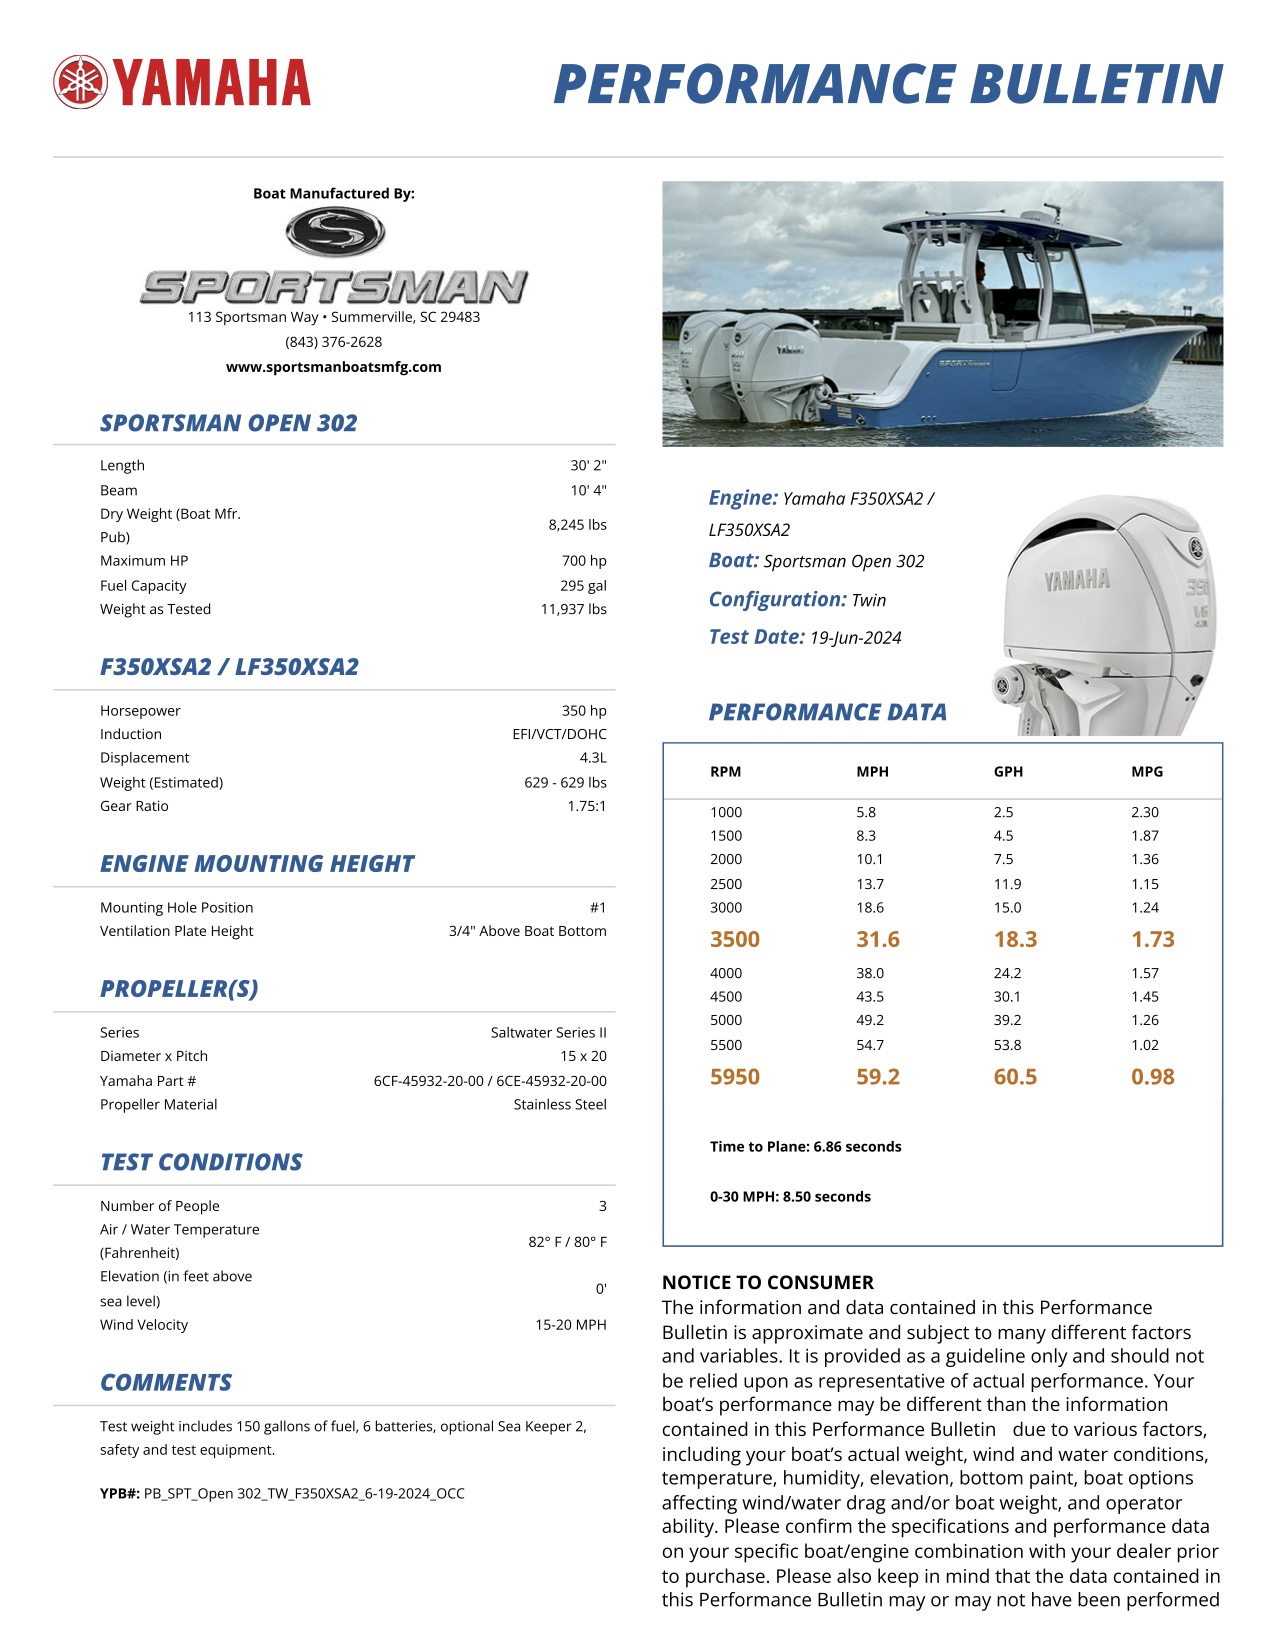 Performance bulletin for 302-center-console